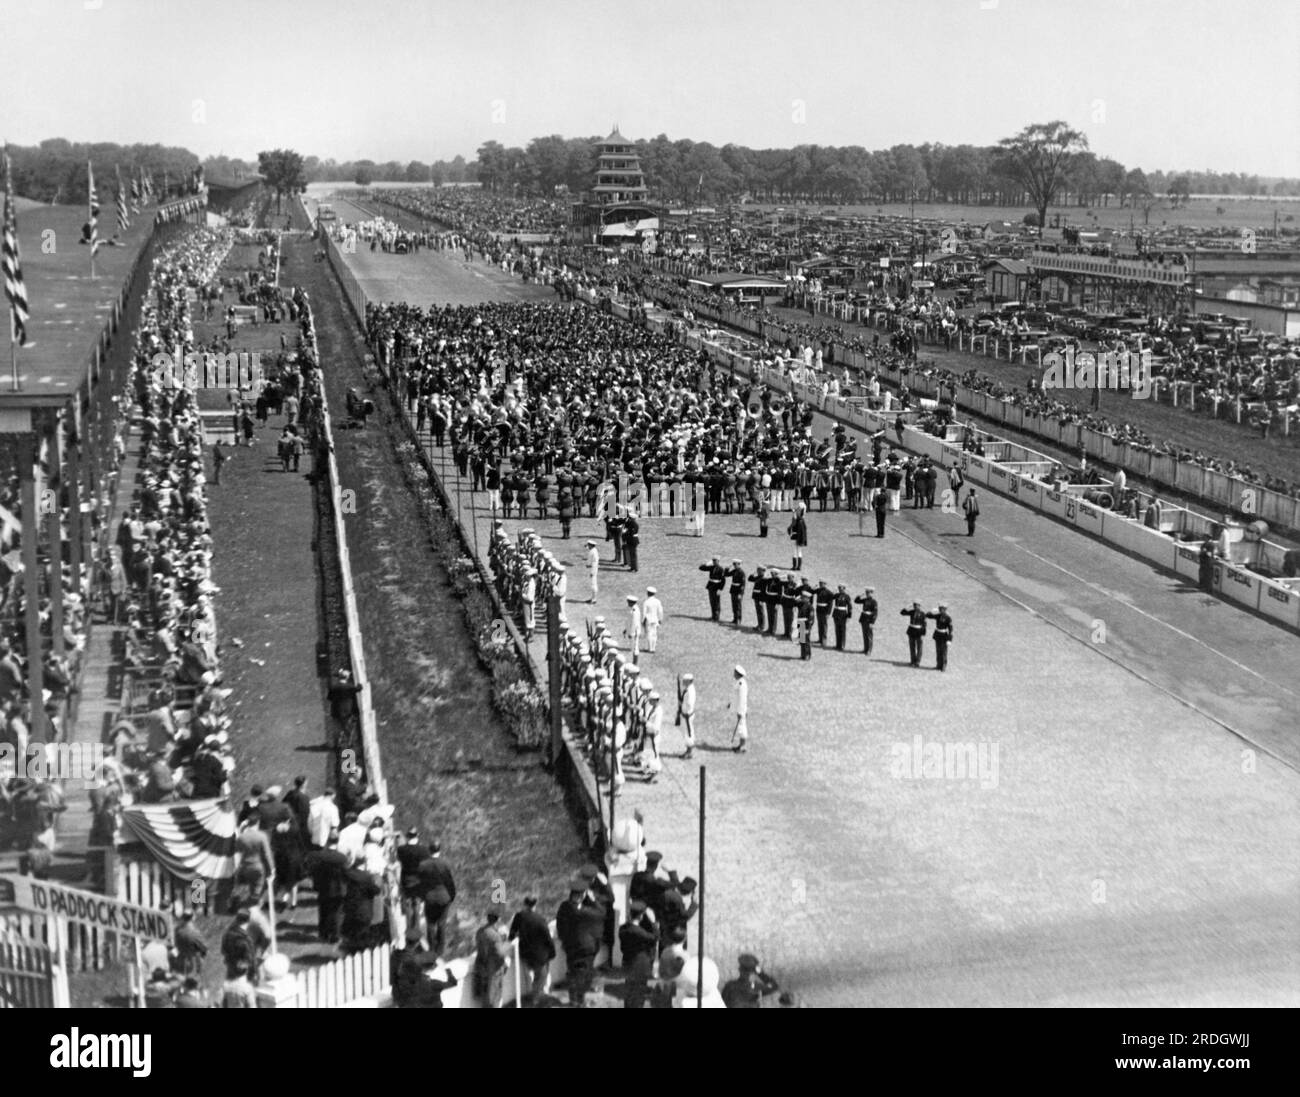 Indianapolis, Indiana:  May 30, 1928 A view of the crowd and ceremonies at the Indy 500 race today, won by Louis Meyer driving a Miller Special at 99.4 mph. Stock Photo